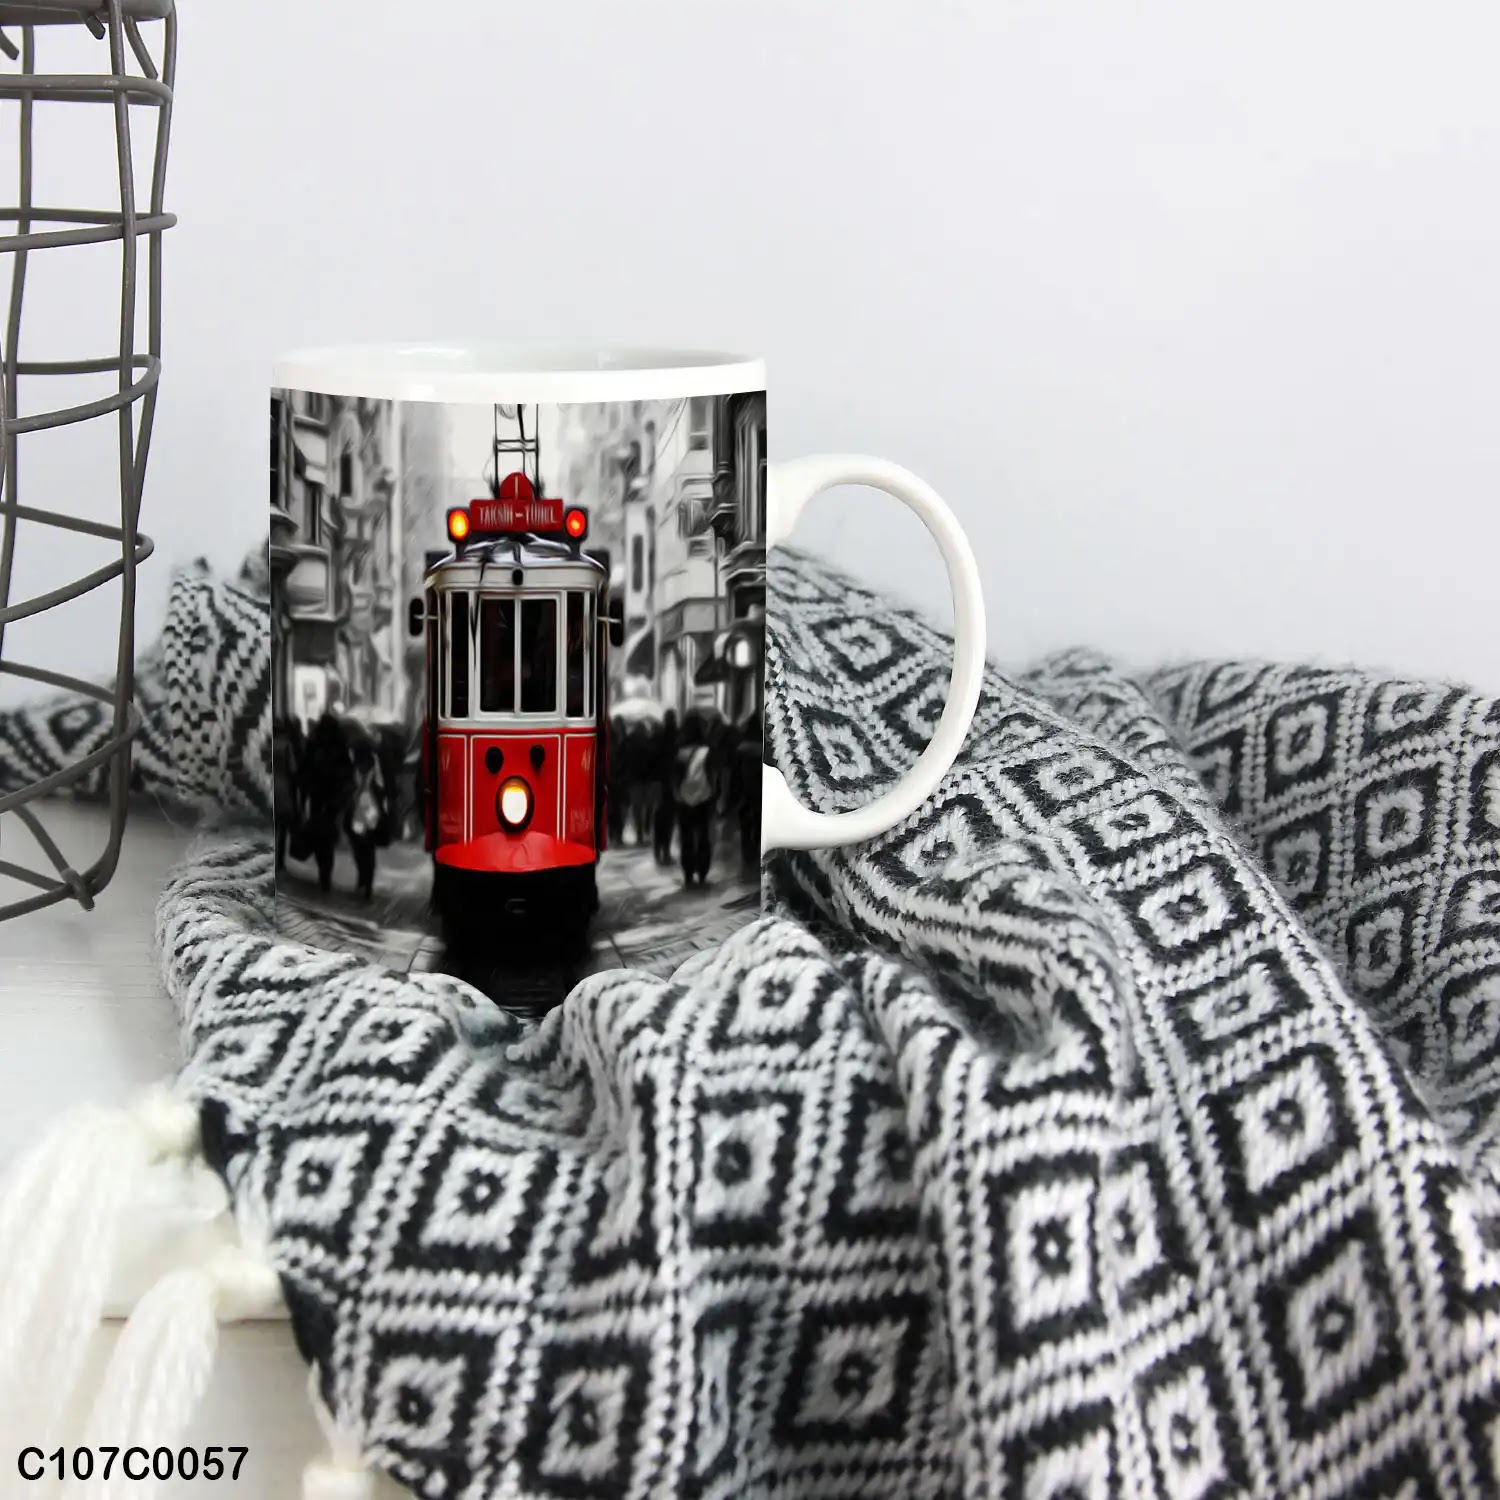 A mug (cup) printed with an image of a red tram